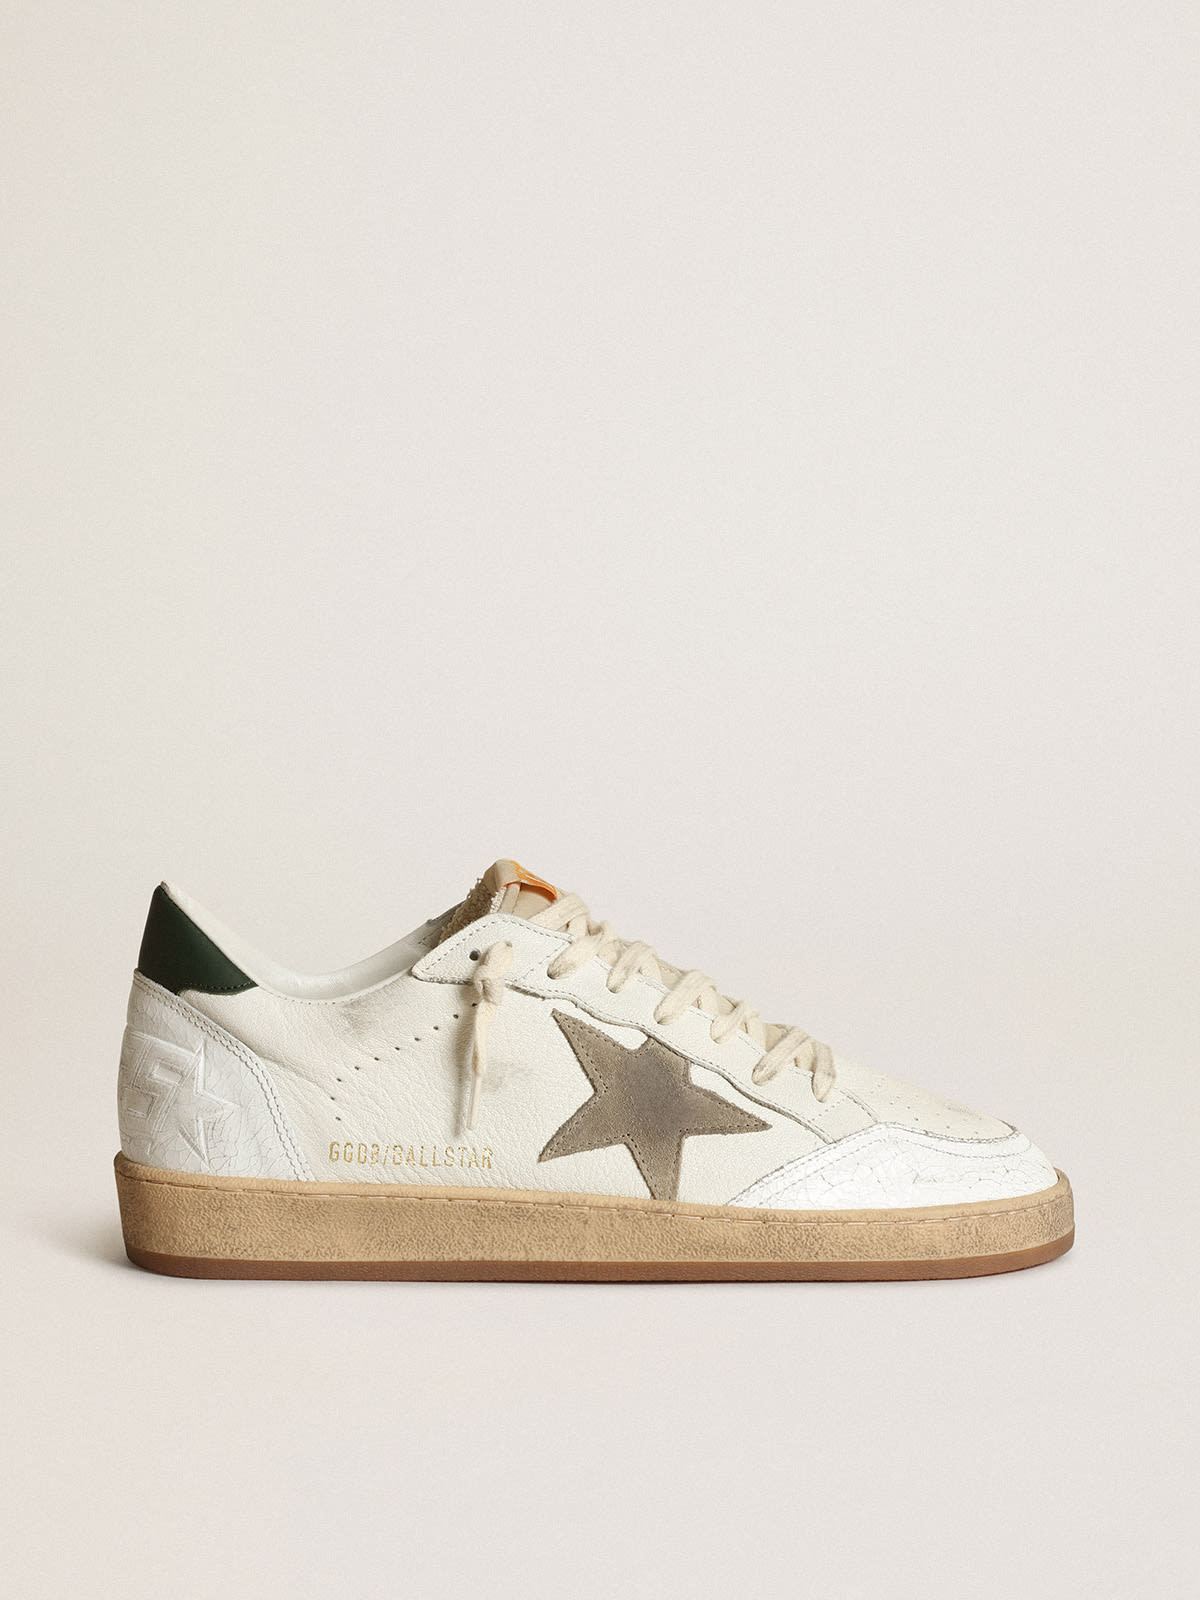 Golden Goose - Men's Ball Star in white nappa with dove gray suede star in 